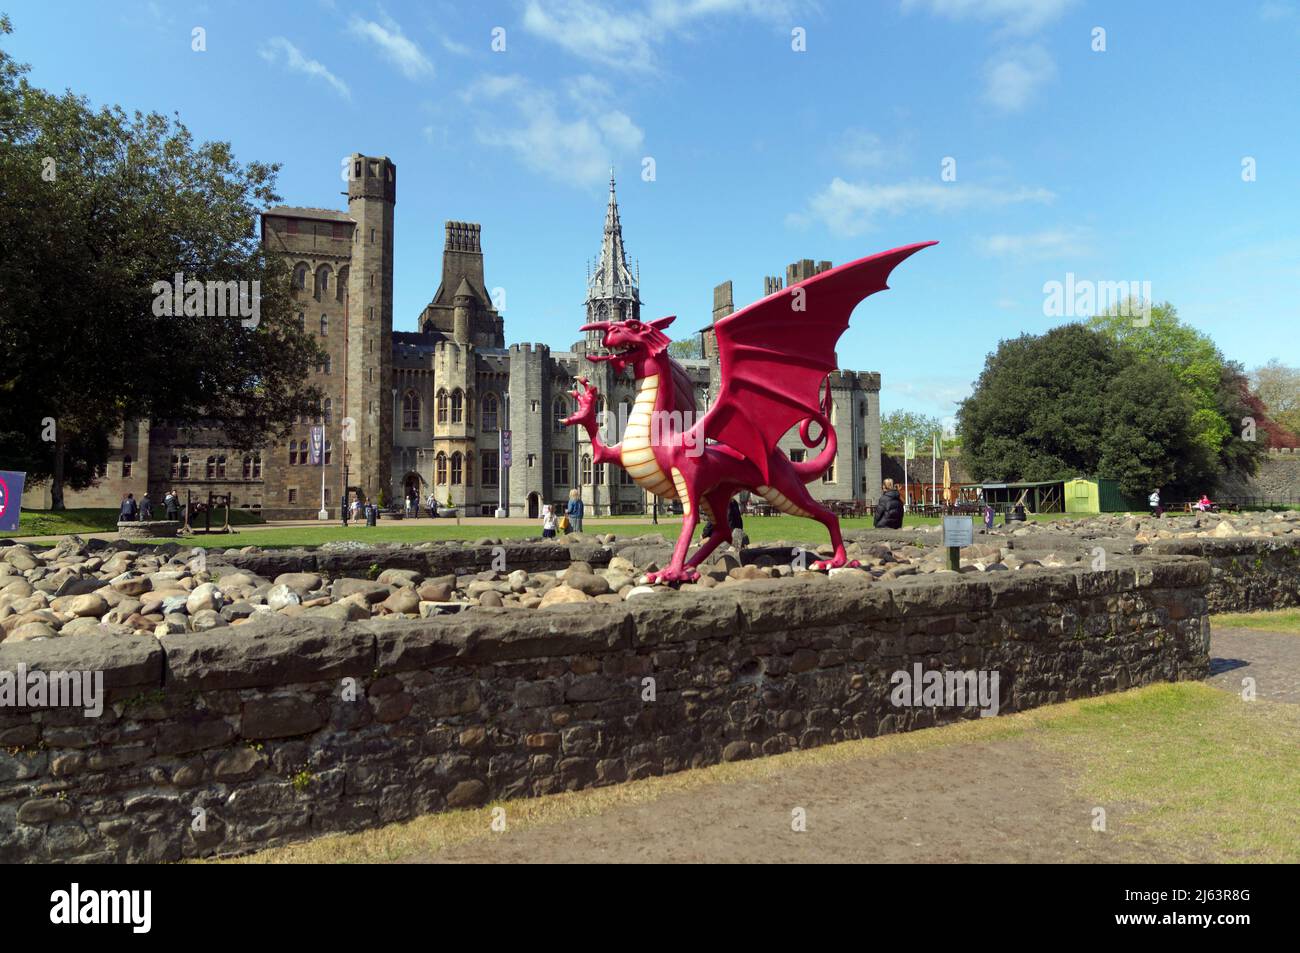 A Red Dragon photo opportunity statue at Cardiff Castle, Spring 2022. Welsh dragon. Stock Photo